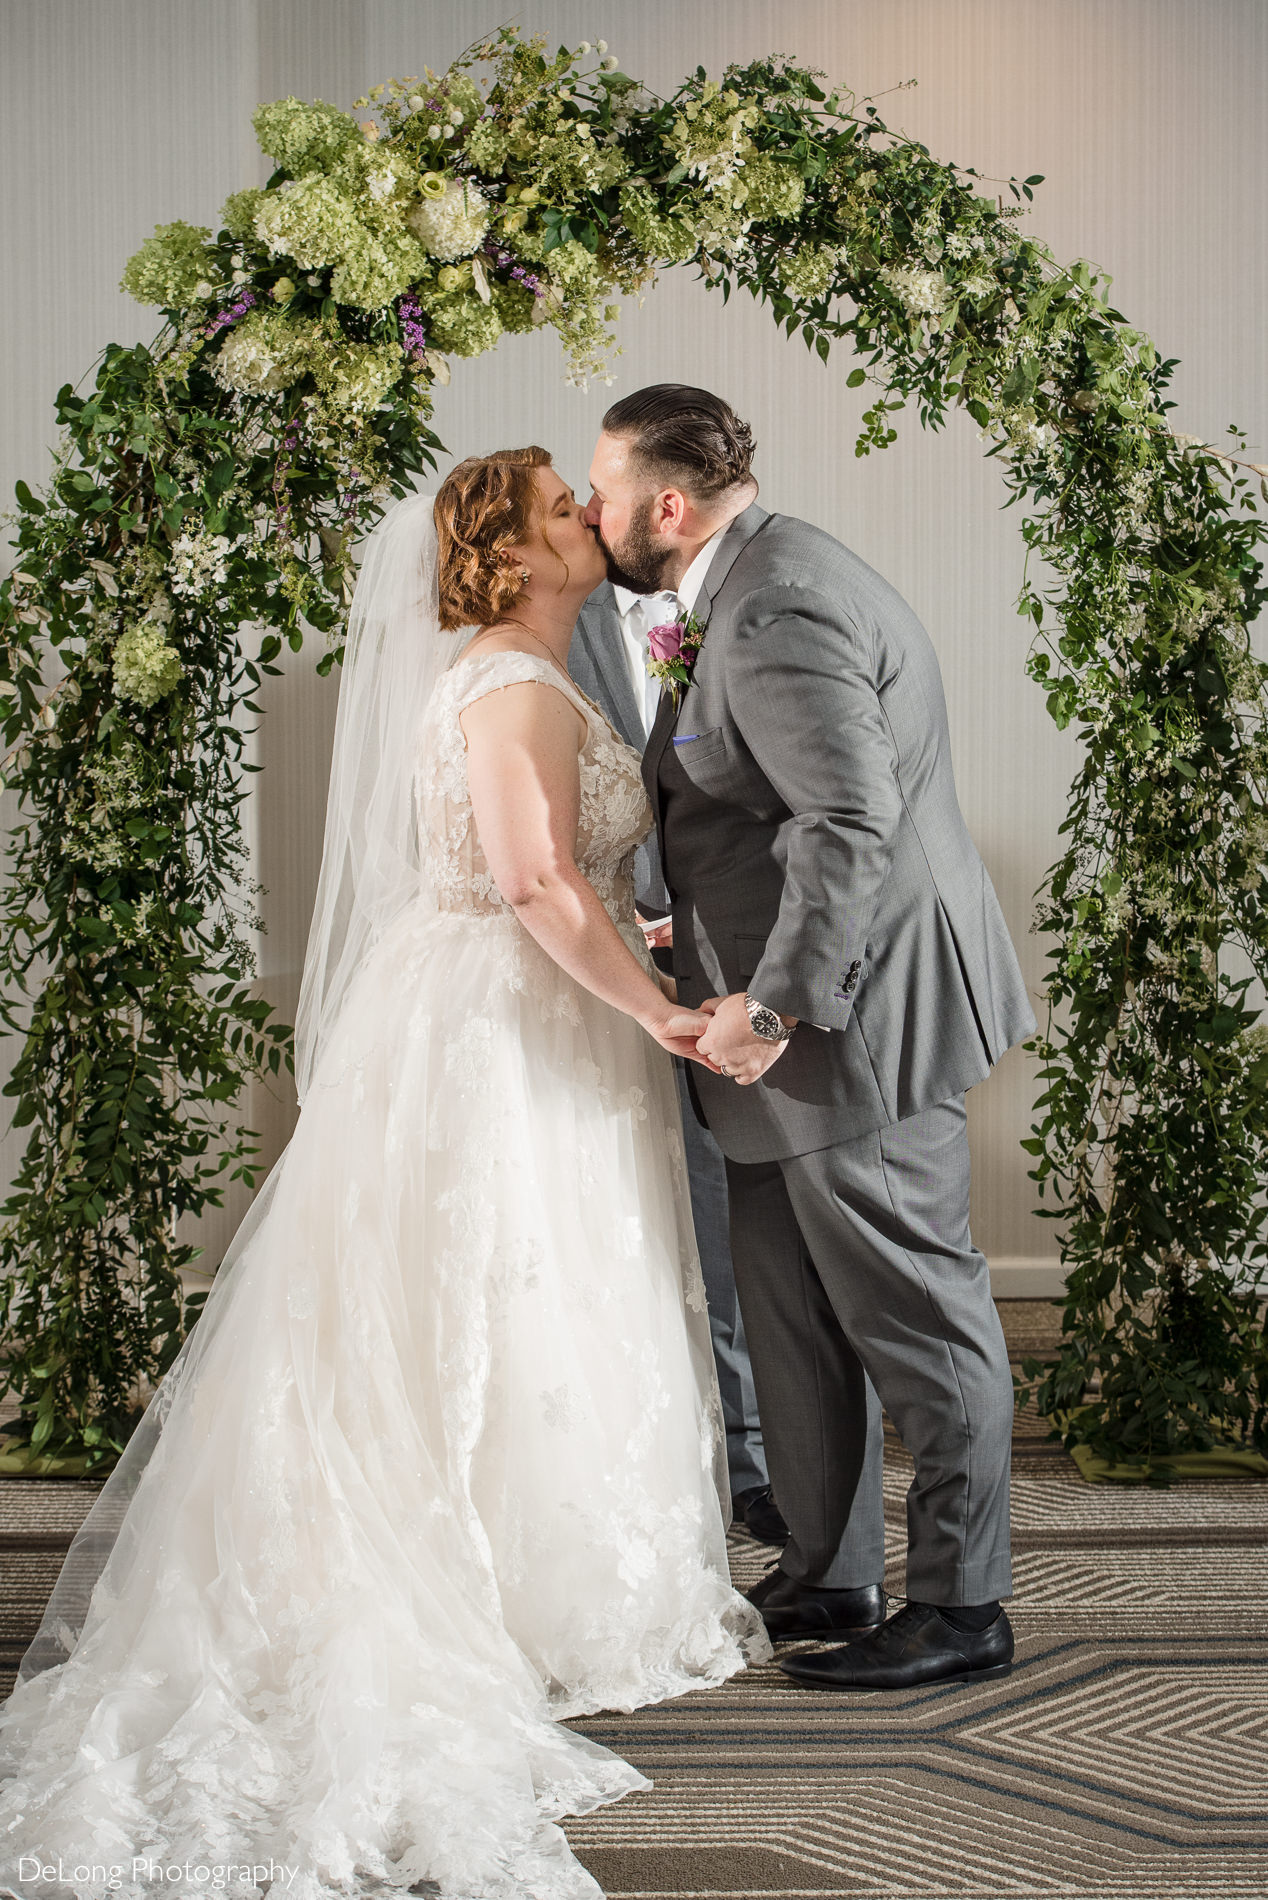 Bride and groom first kiss during wedding ceremony by Charlotte wedding photographers DeLong Photography